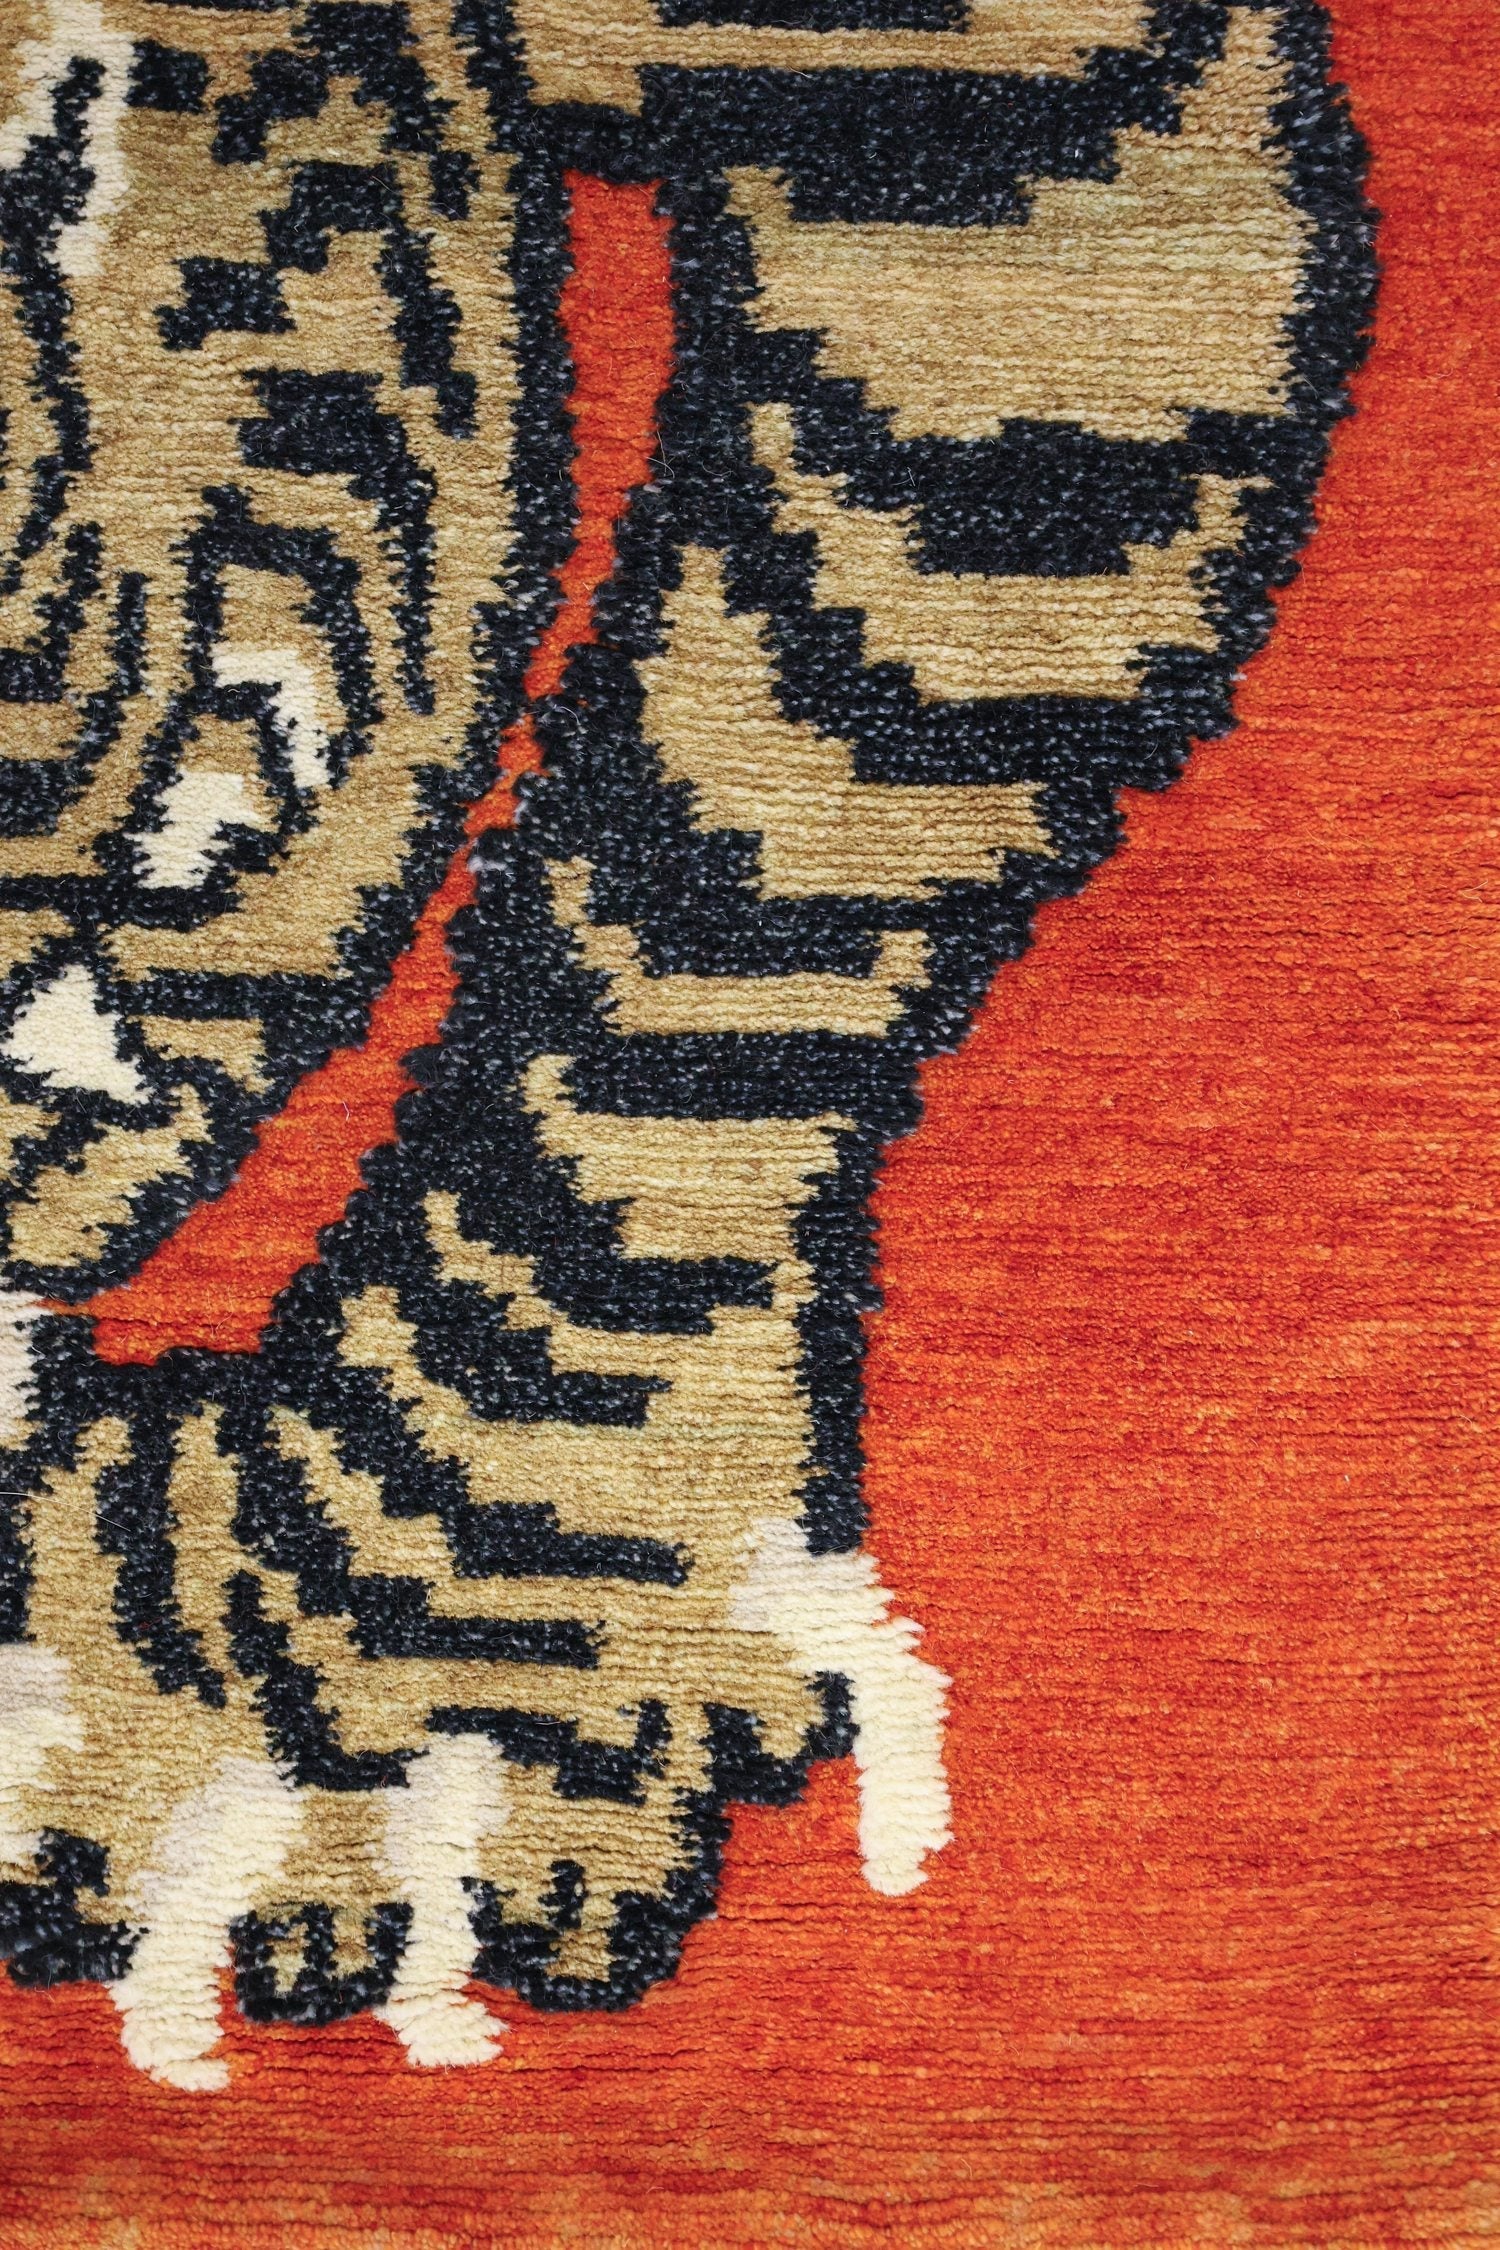 Tantric Tiger Handwoven Contemporary Rug, J70442